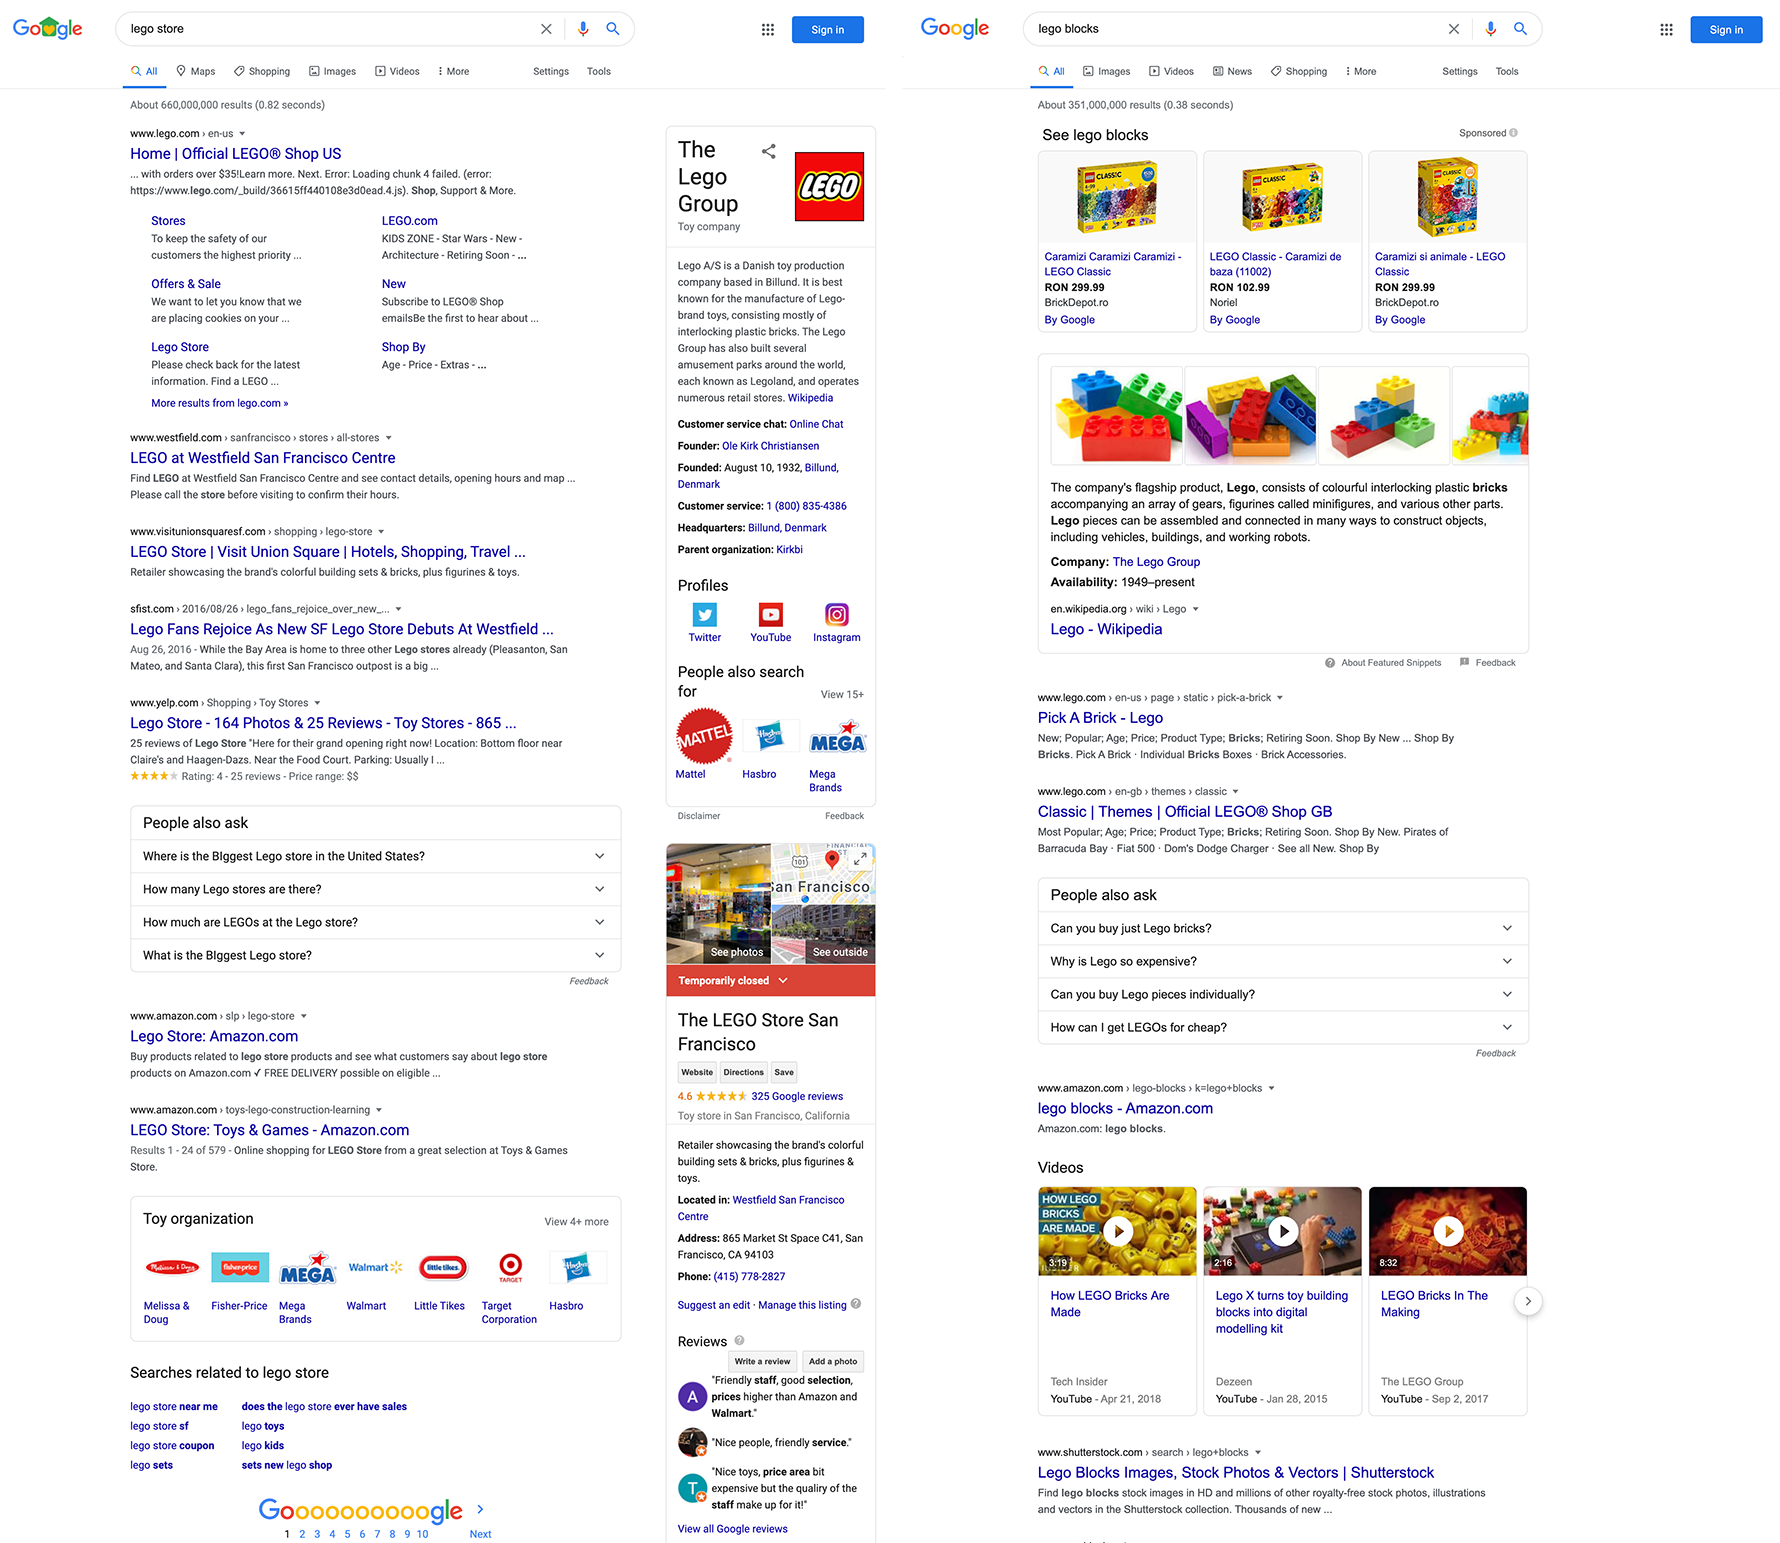 Side by side SERP screenshots with SERP features triggered by "lego store" and "lego blocks" searches.